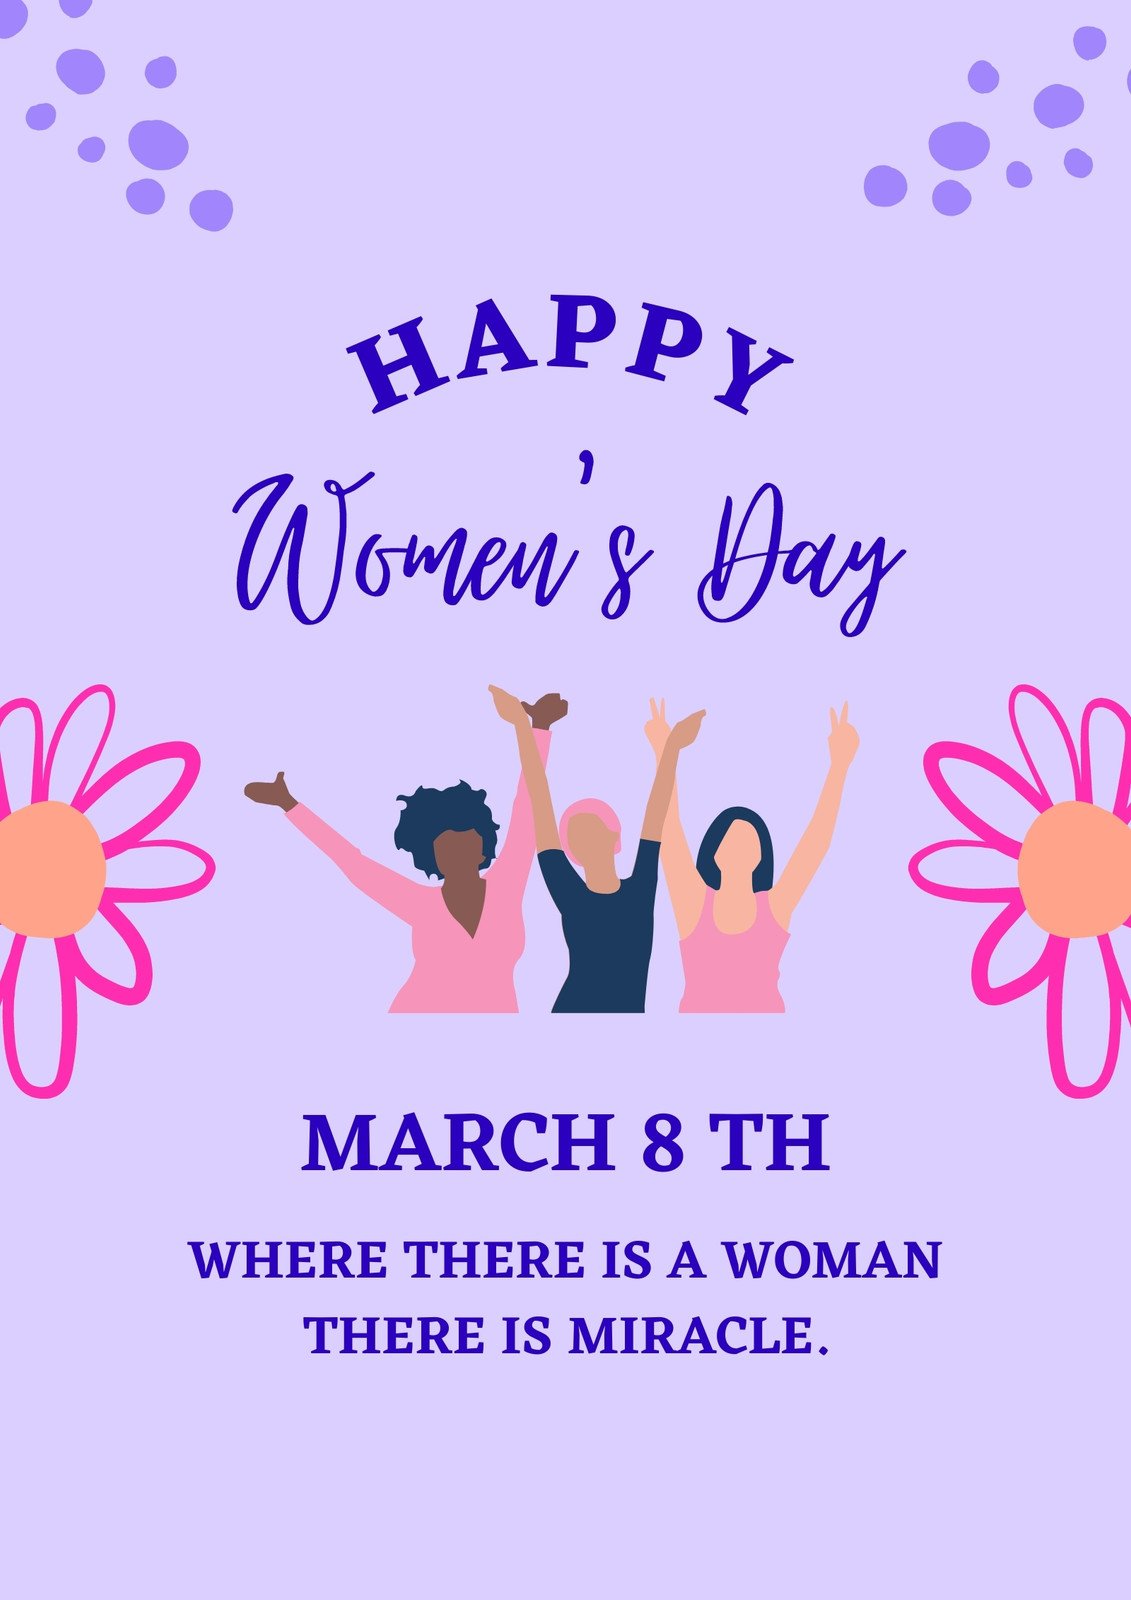 Happy Women's Day 🎉 Here are some plans for the weekend